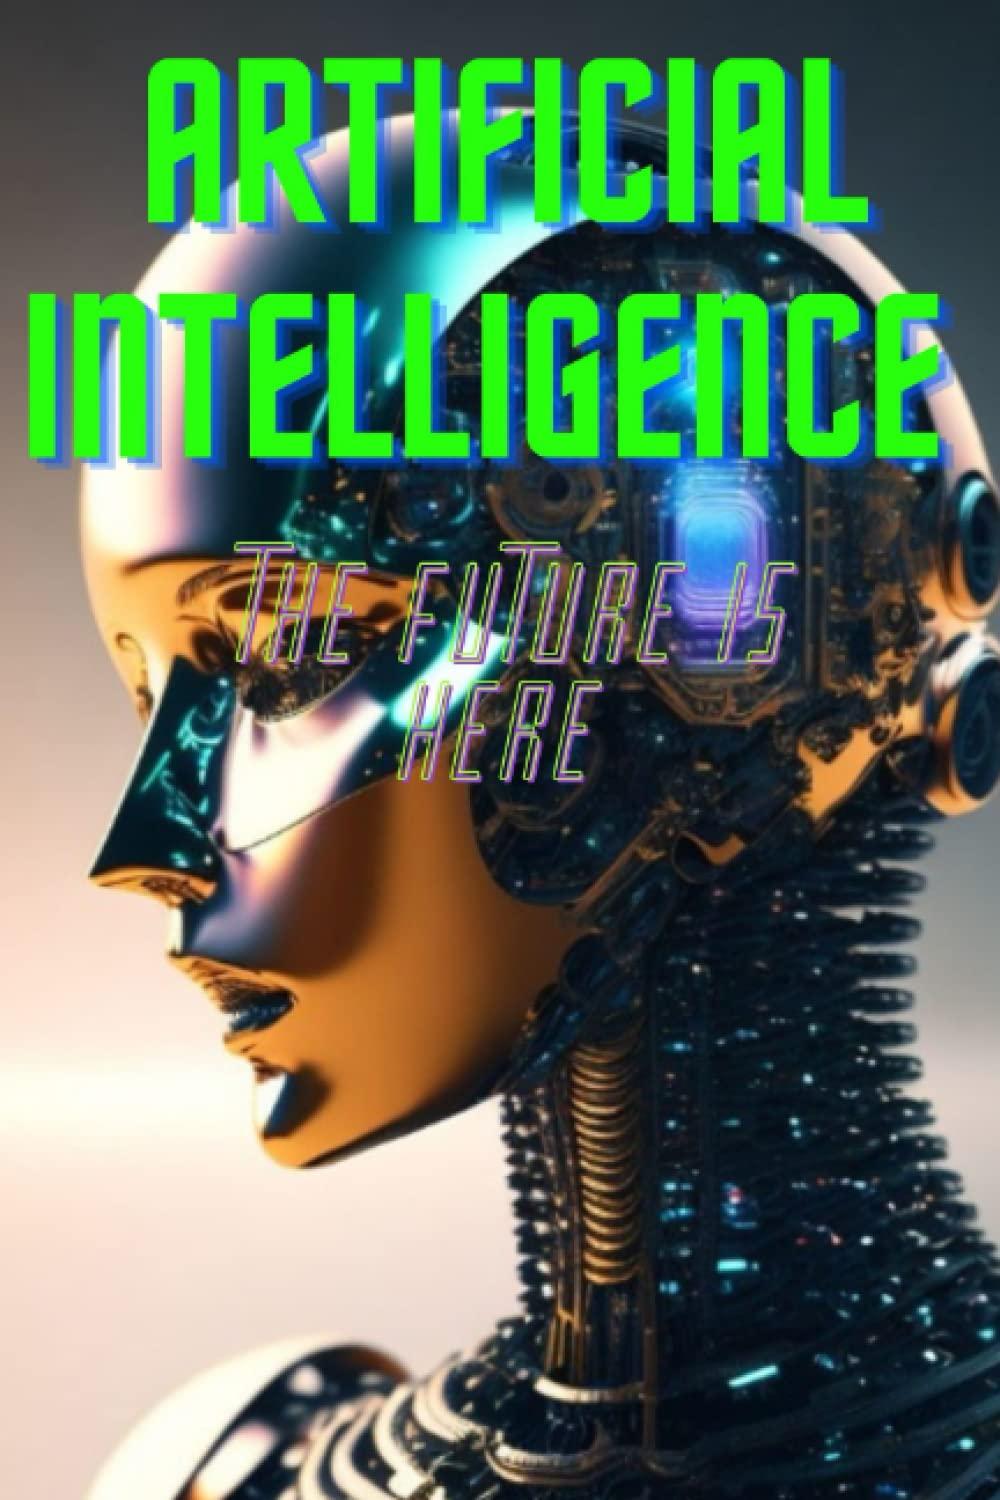 artificial intelligence the future is here 1st edition anthony t. fischer b0bxmkqxzf, 979-8386351403